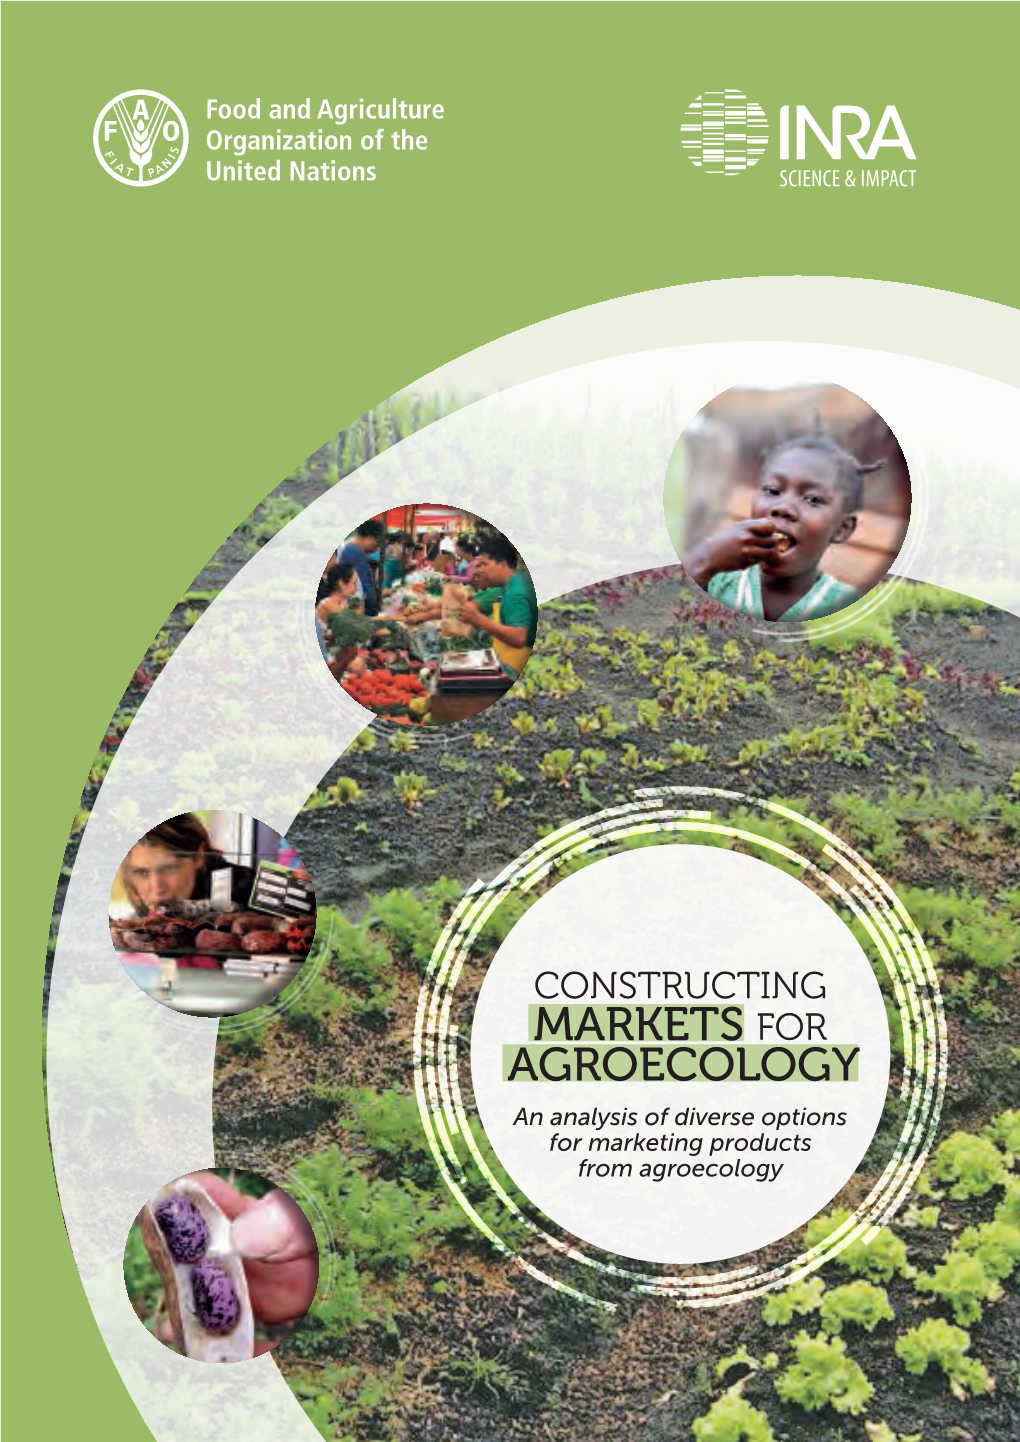 Constructing Markets for Agroecology — an Analysis of Diverse Options for Marketing Products from Agroecology FAO/INRA